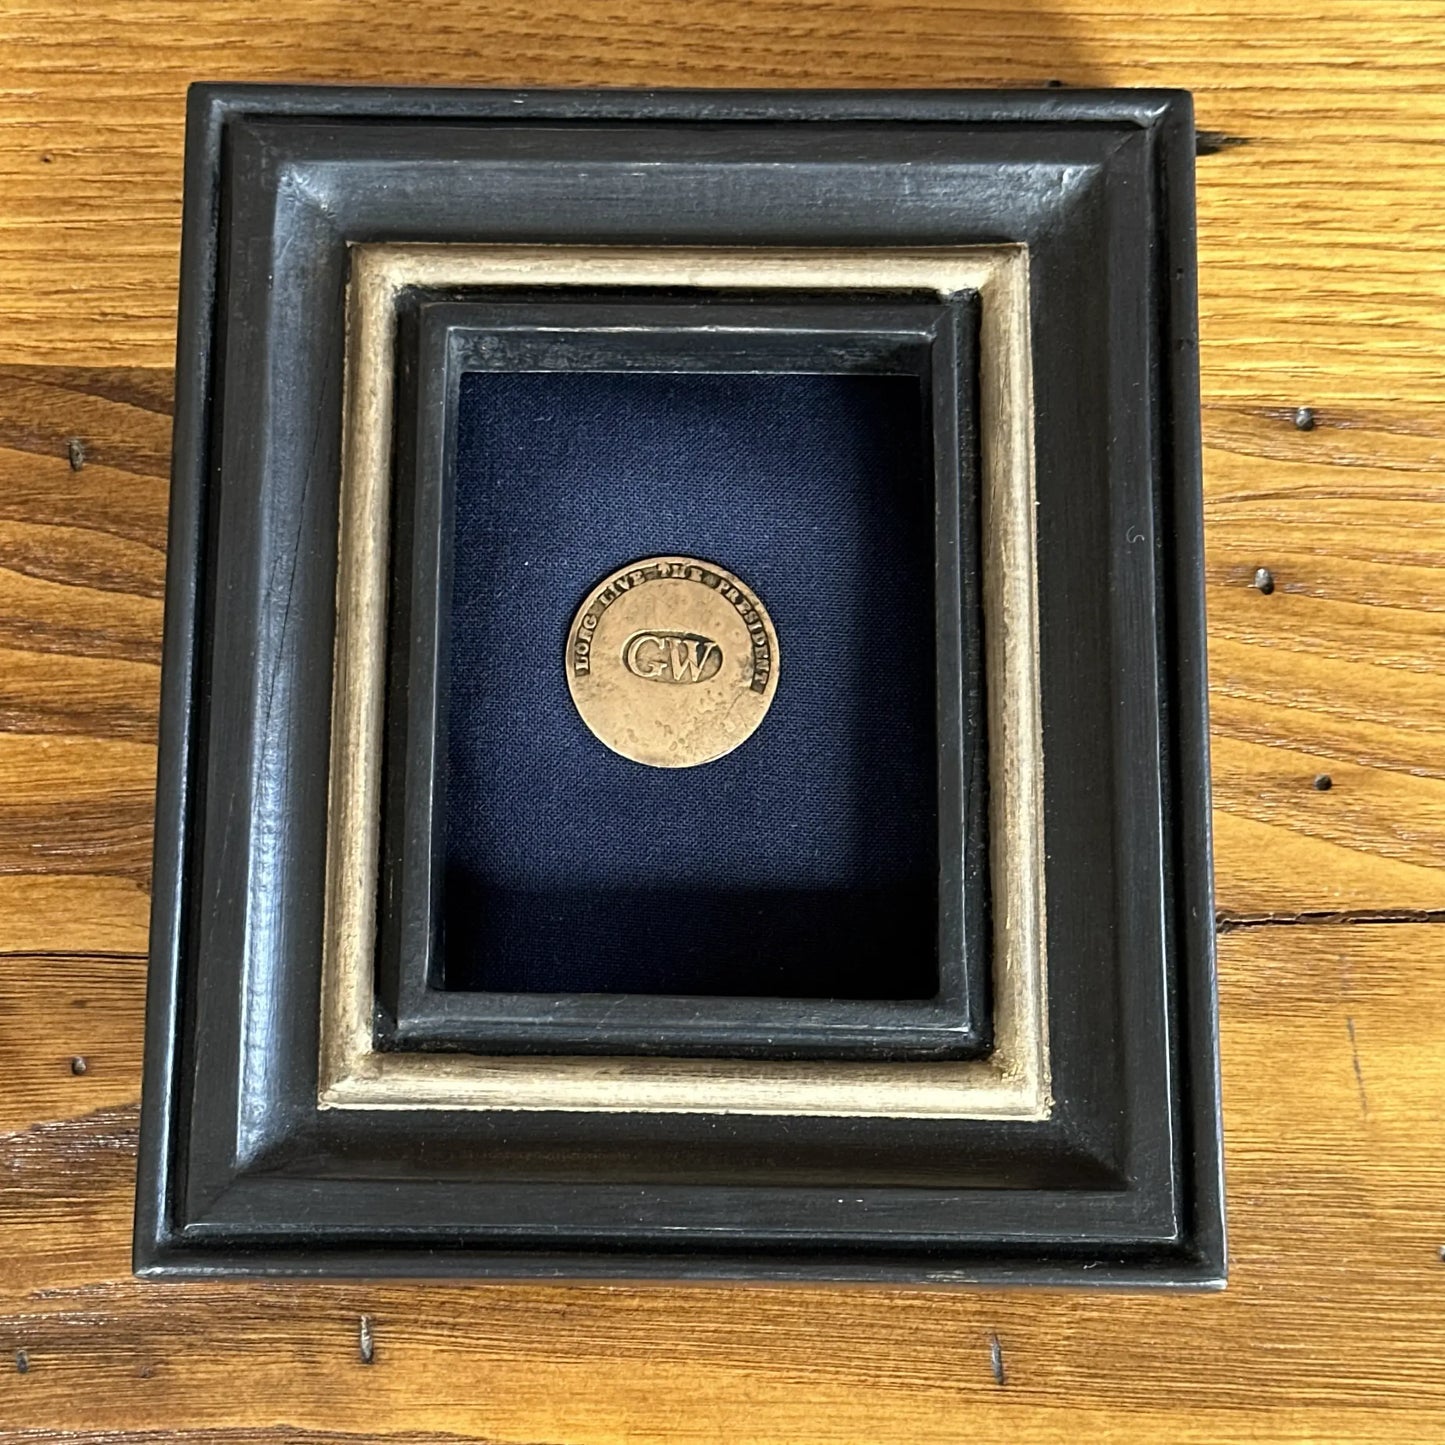 George Washington 1789 "GW" Inaugural Button — "LONG LIVE THE PRESIDENT" — Includes certificate of authenticity